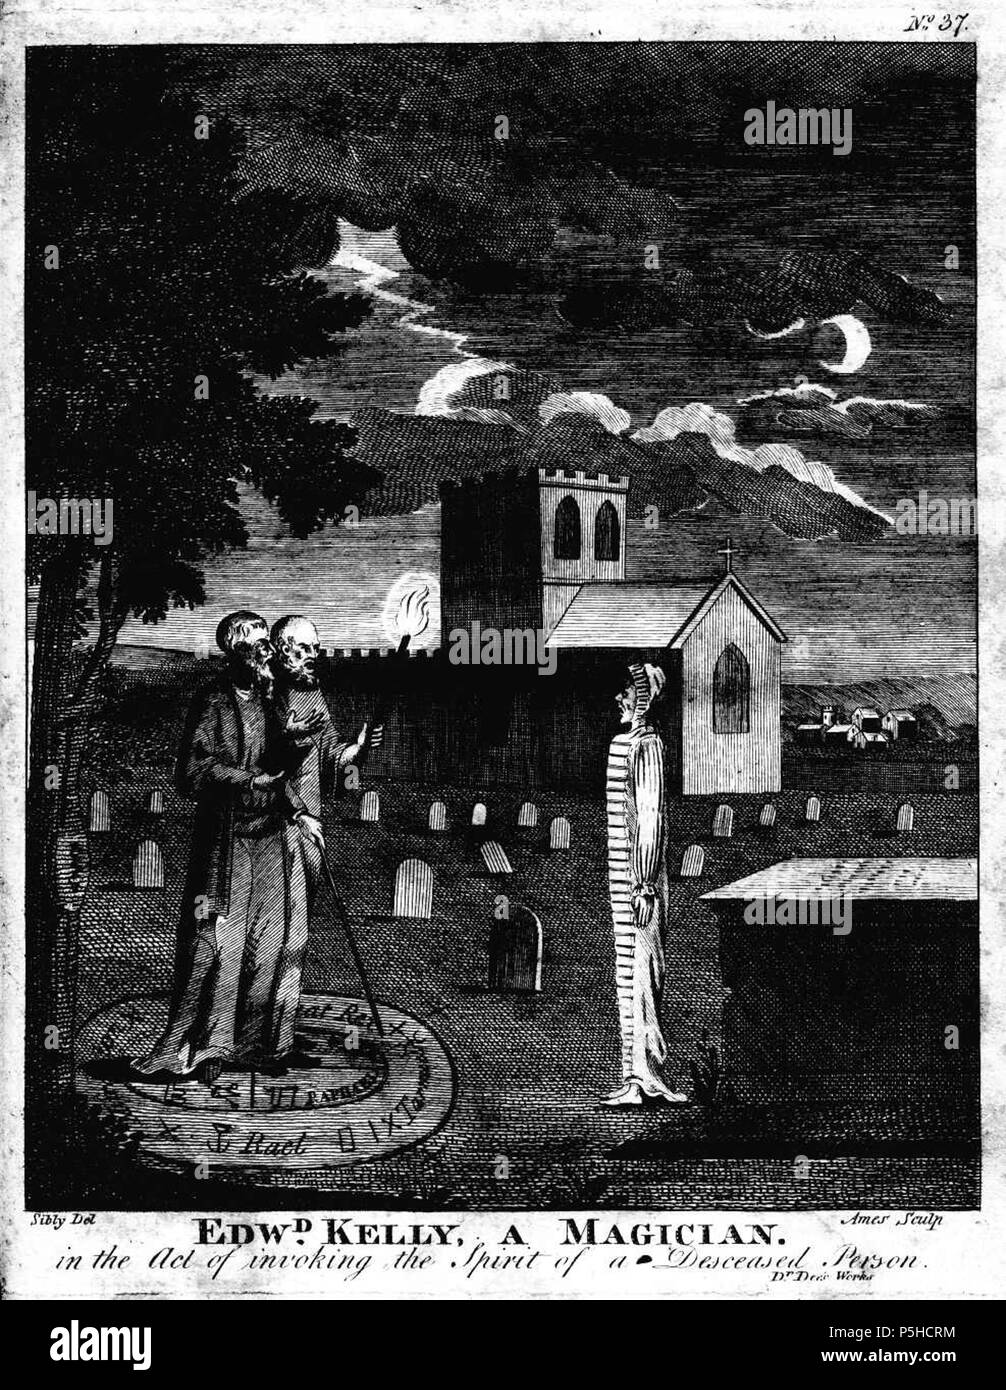 N/A. 'Edw[ar]d Kelly, a Magician. in the Act of invoking the Spirit of a Deceased Person.' . 1806. engraved by Ames of Bristol (according to Fincham, Artists and engravers of British and American book plates, 1897), original drawing by Sibly 44 A Magician by Edward Kelly Stock Photo